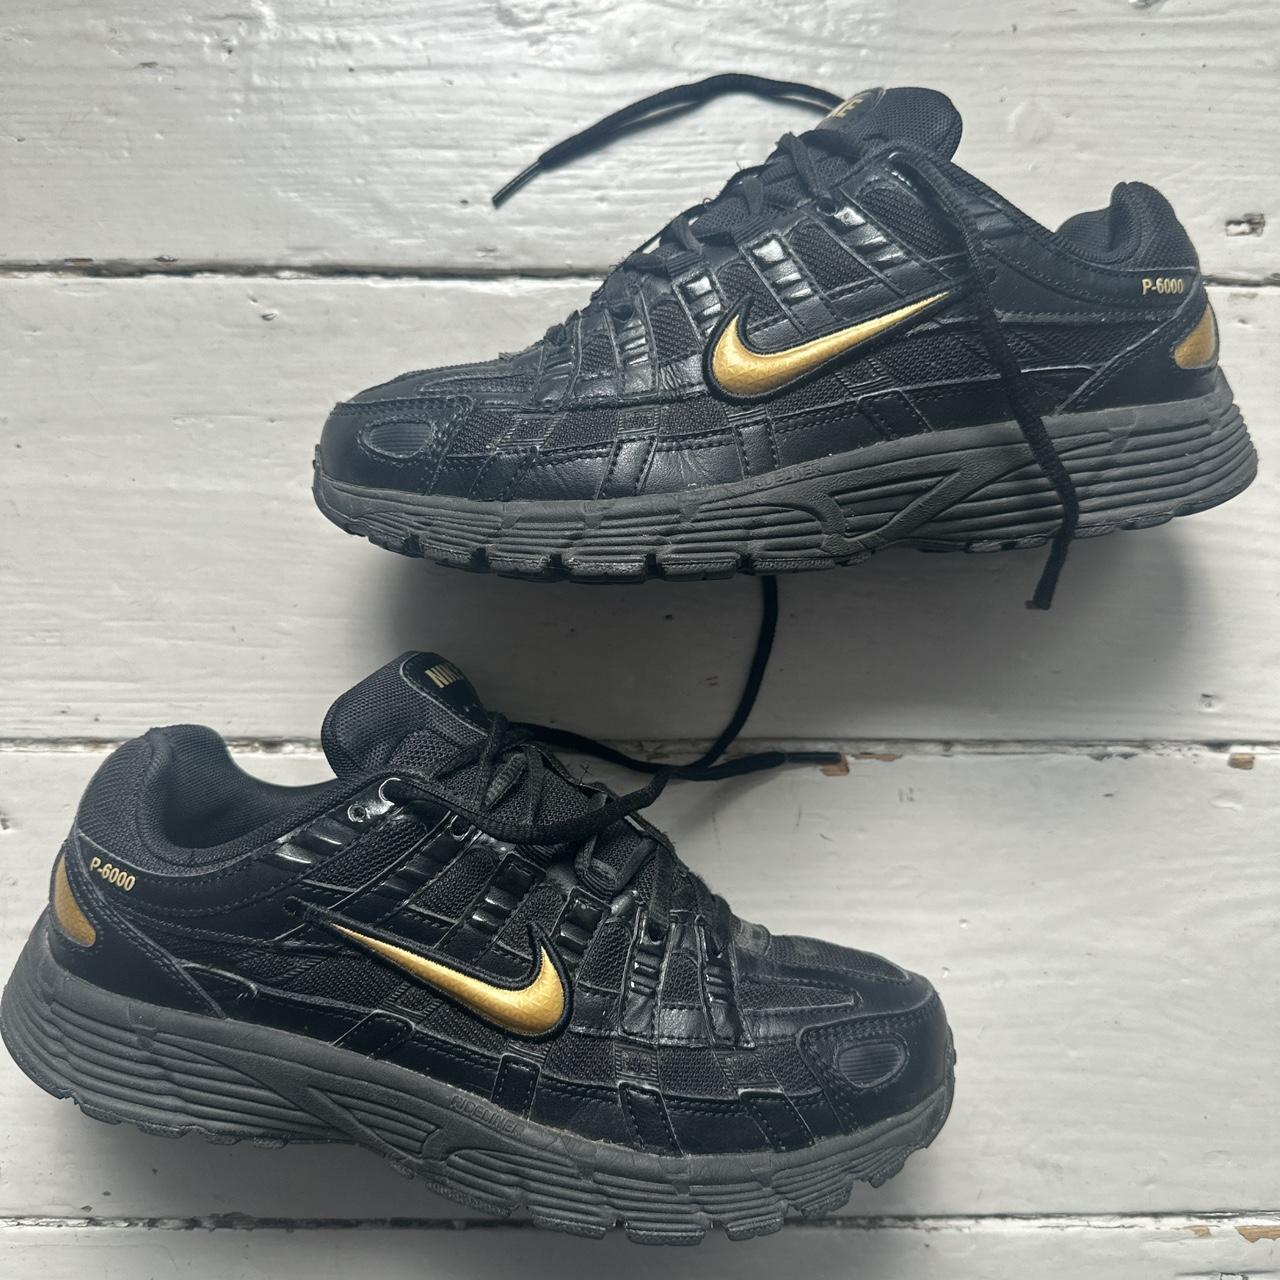 Nike P-6000 Black and Gold Trainers